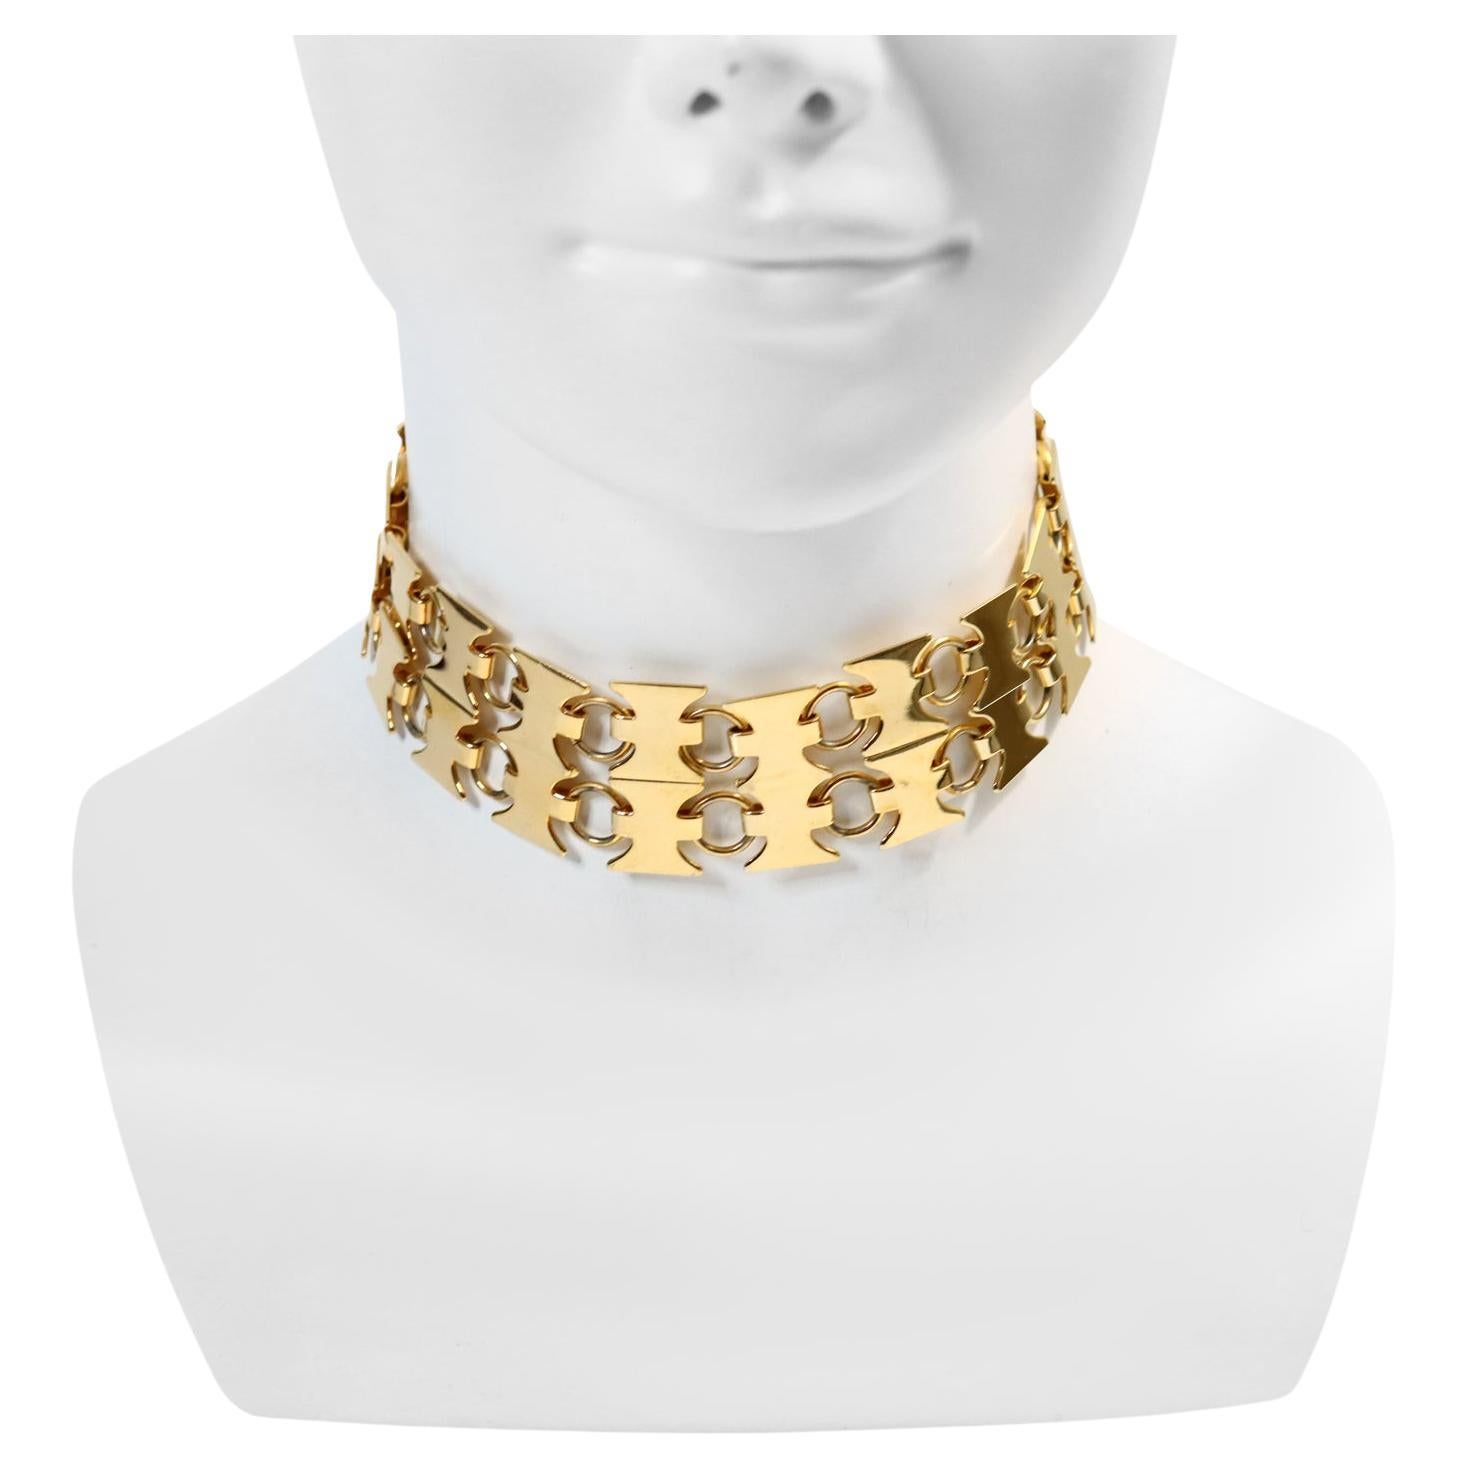 Vintage Vendome Gold Tone Wide Choker Necklace Circa 1970s.  This amazing choker looks like xoxo Double row. This is such a great find. 12.5